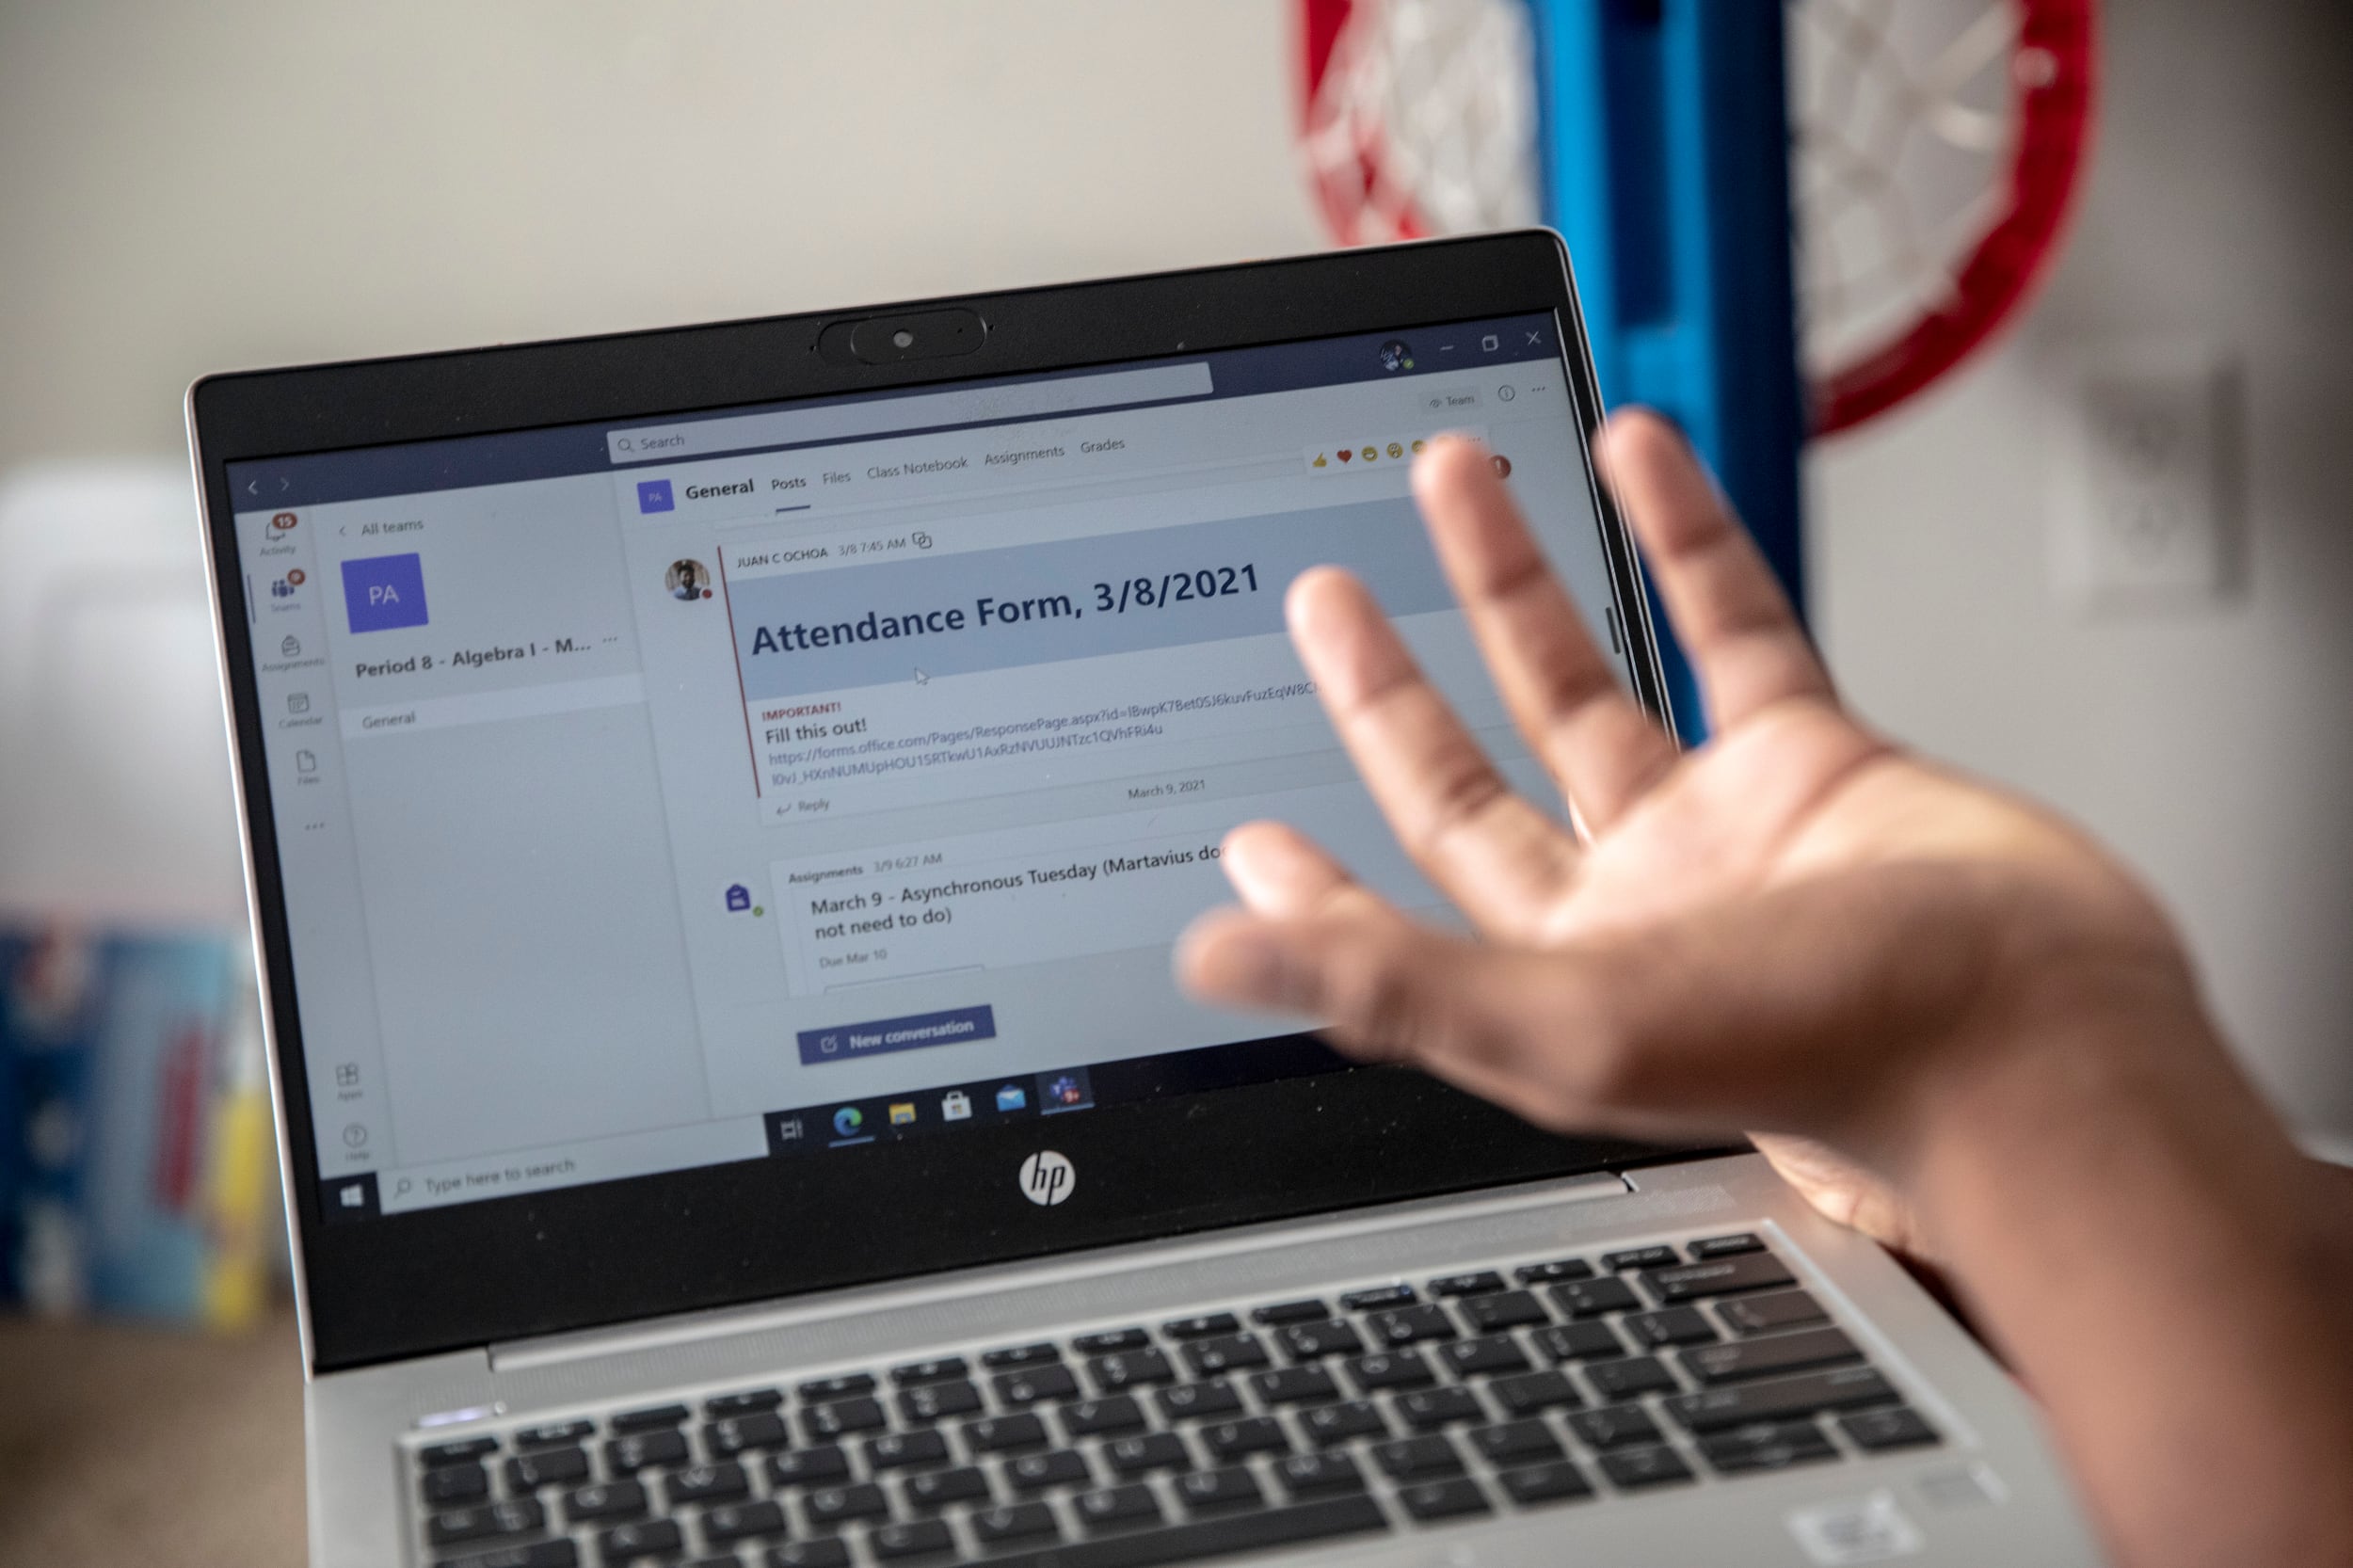 The hand of a student appears in front of a laptop screen, as they attempt to complete an attendance report for that day of virtual learning.